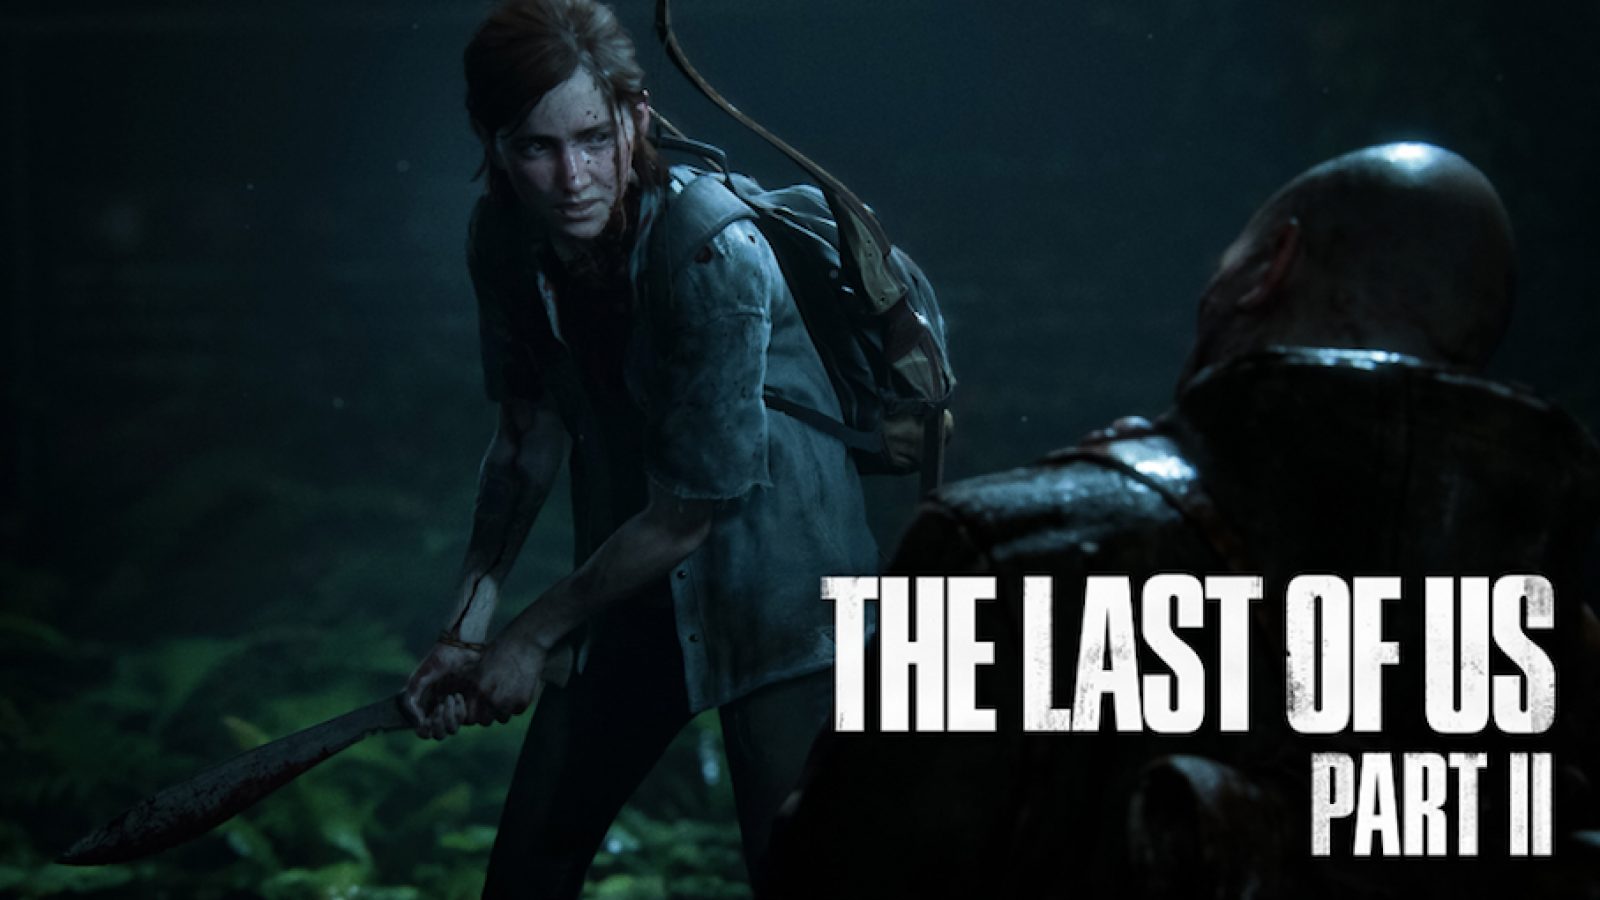 The Last of Us Part 2 Is Coming Later This Year or 2020